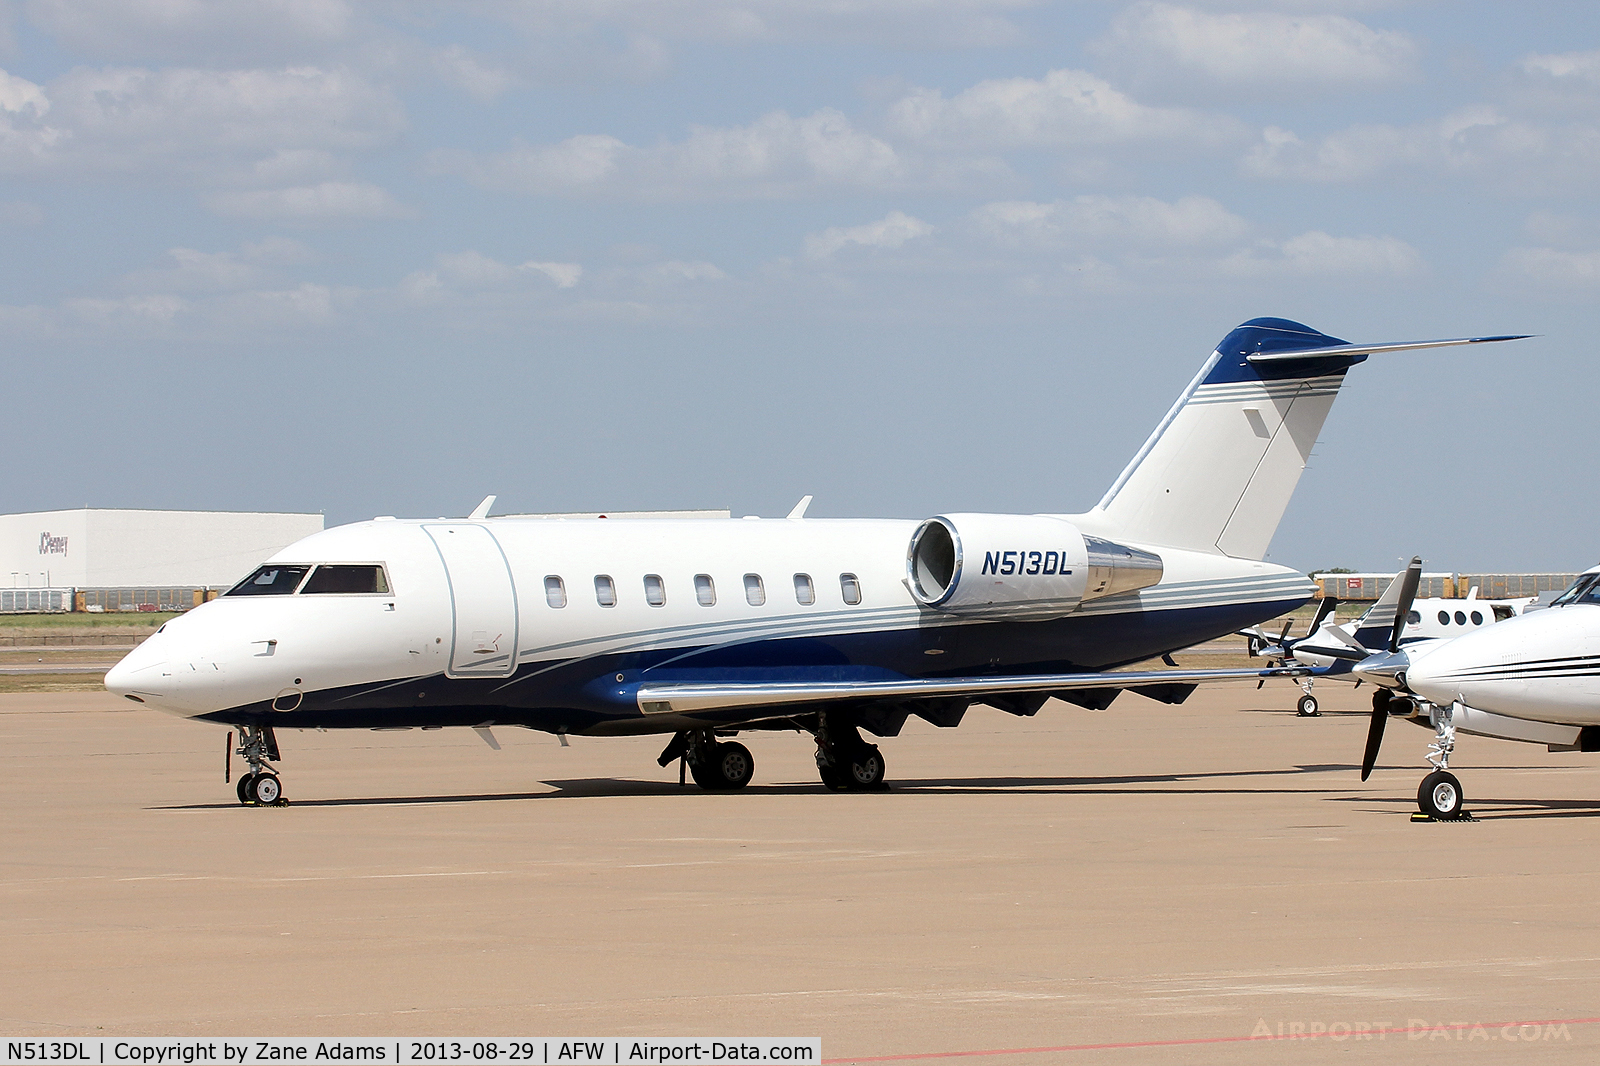 N513DL, 2009 Bombardier Challenger 605 (CL-600-2B16) C/N 5811, At Alliance Airport - Ft. Worth, TX